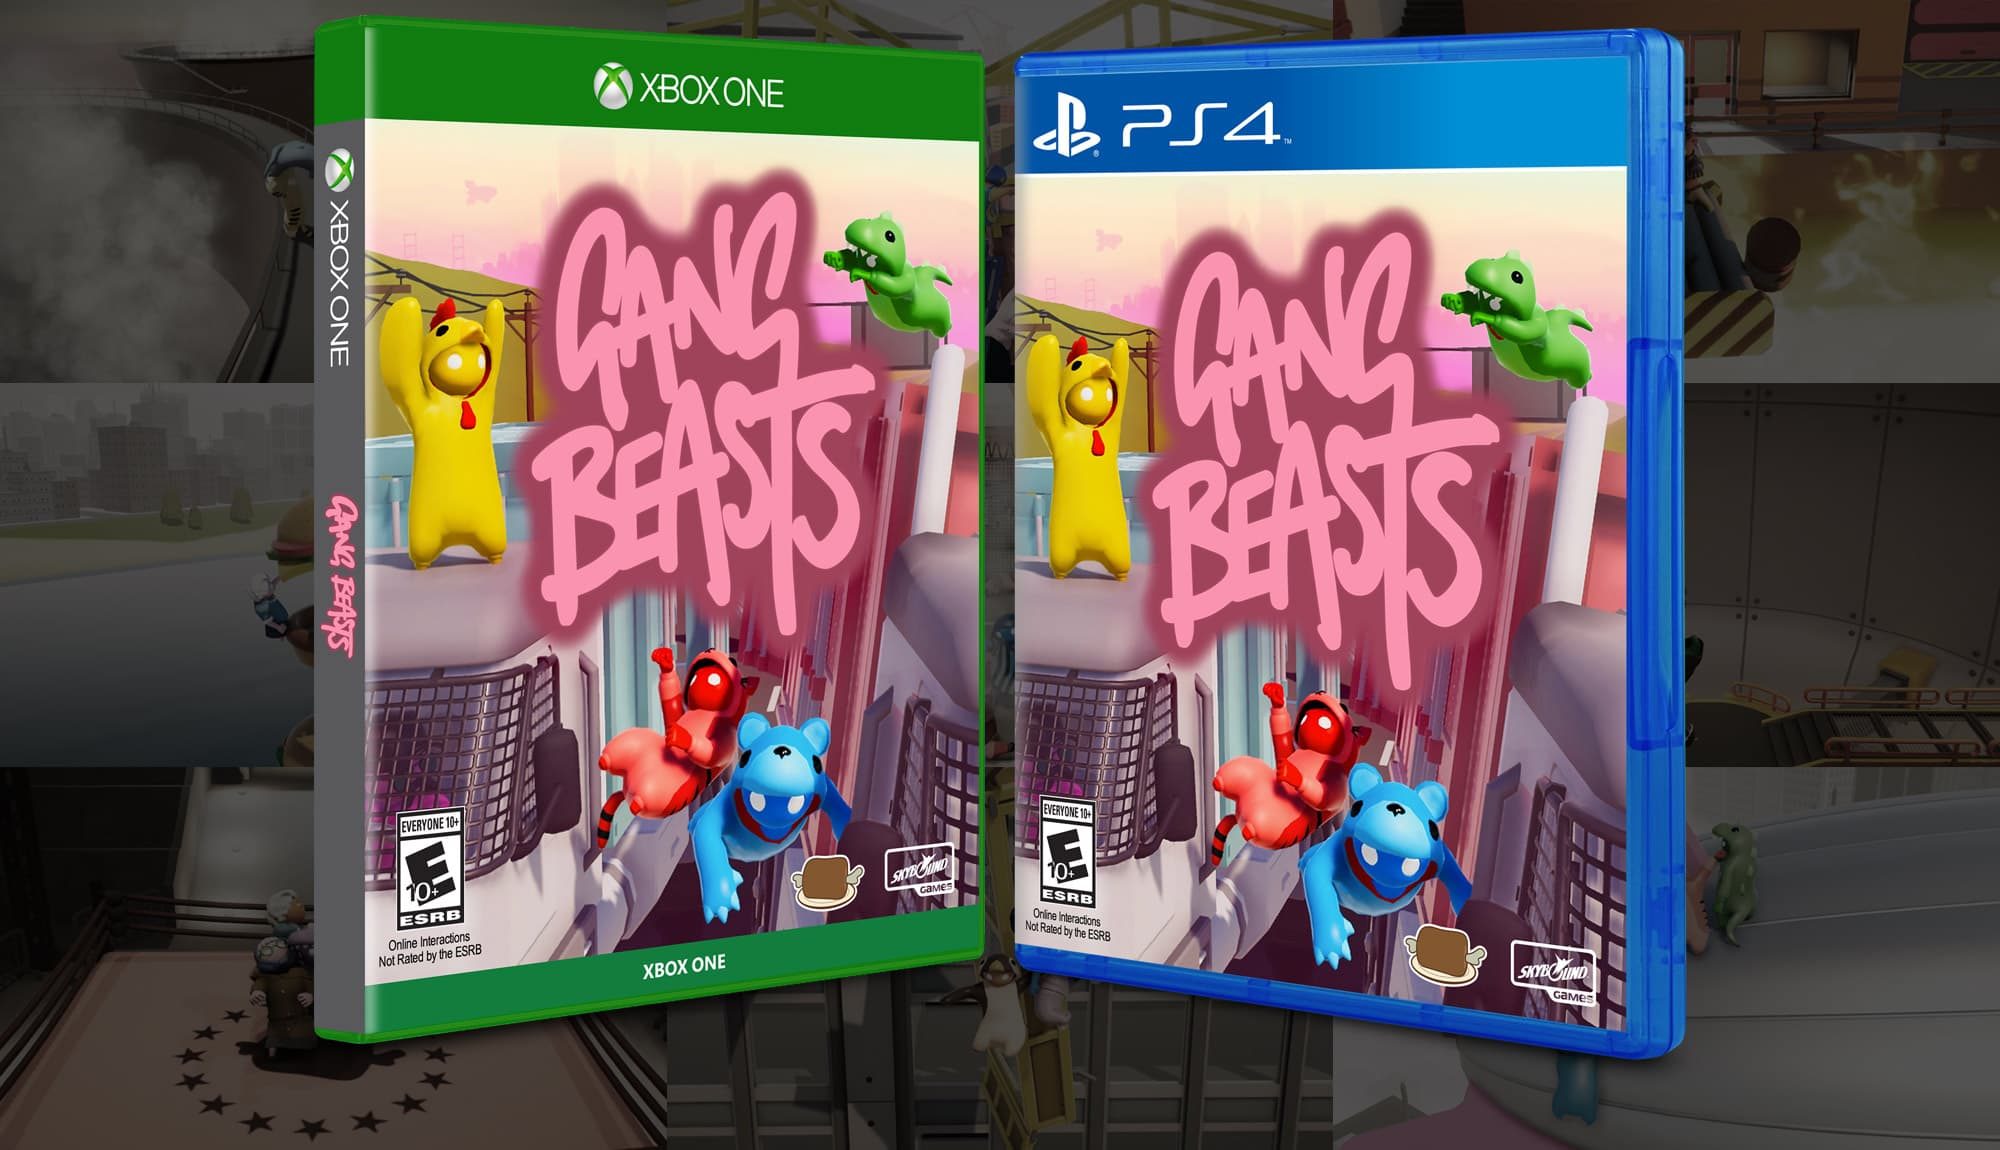 Gang Beasts Hitting Consoles This December Skybound Entertainment